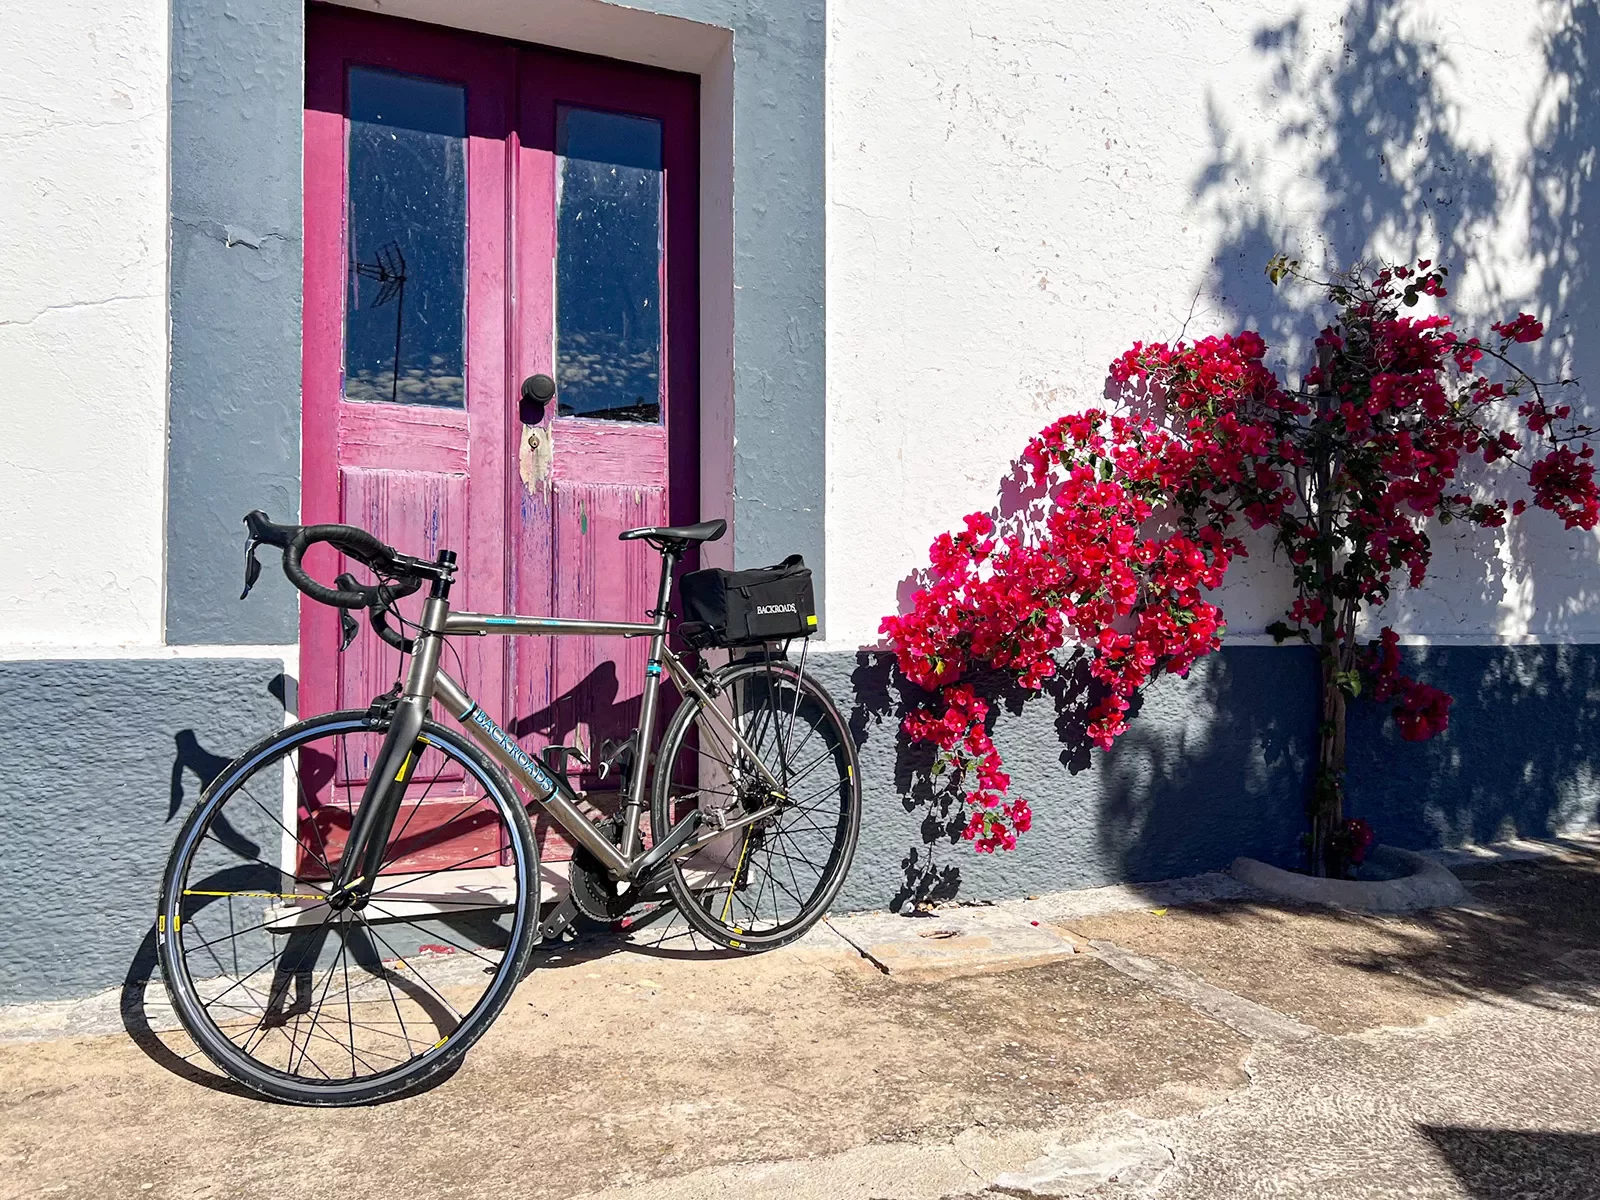 A performance bicycle leaning against a red door